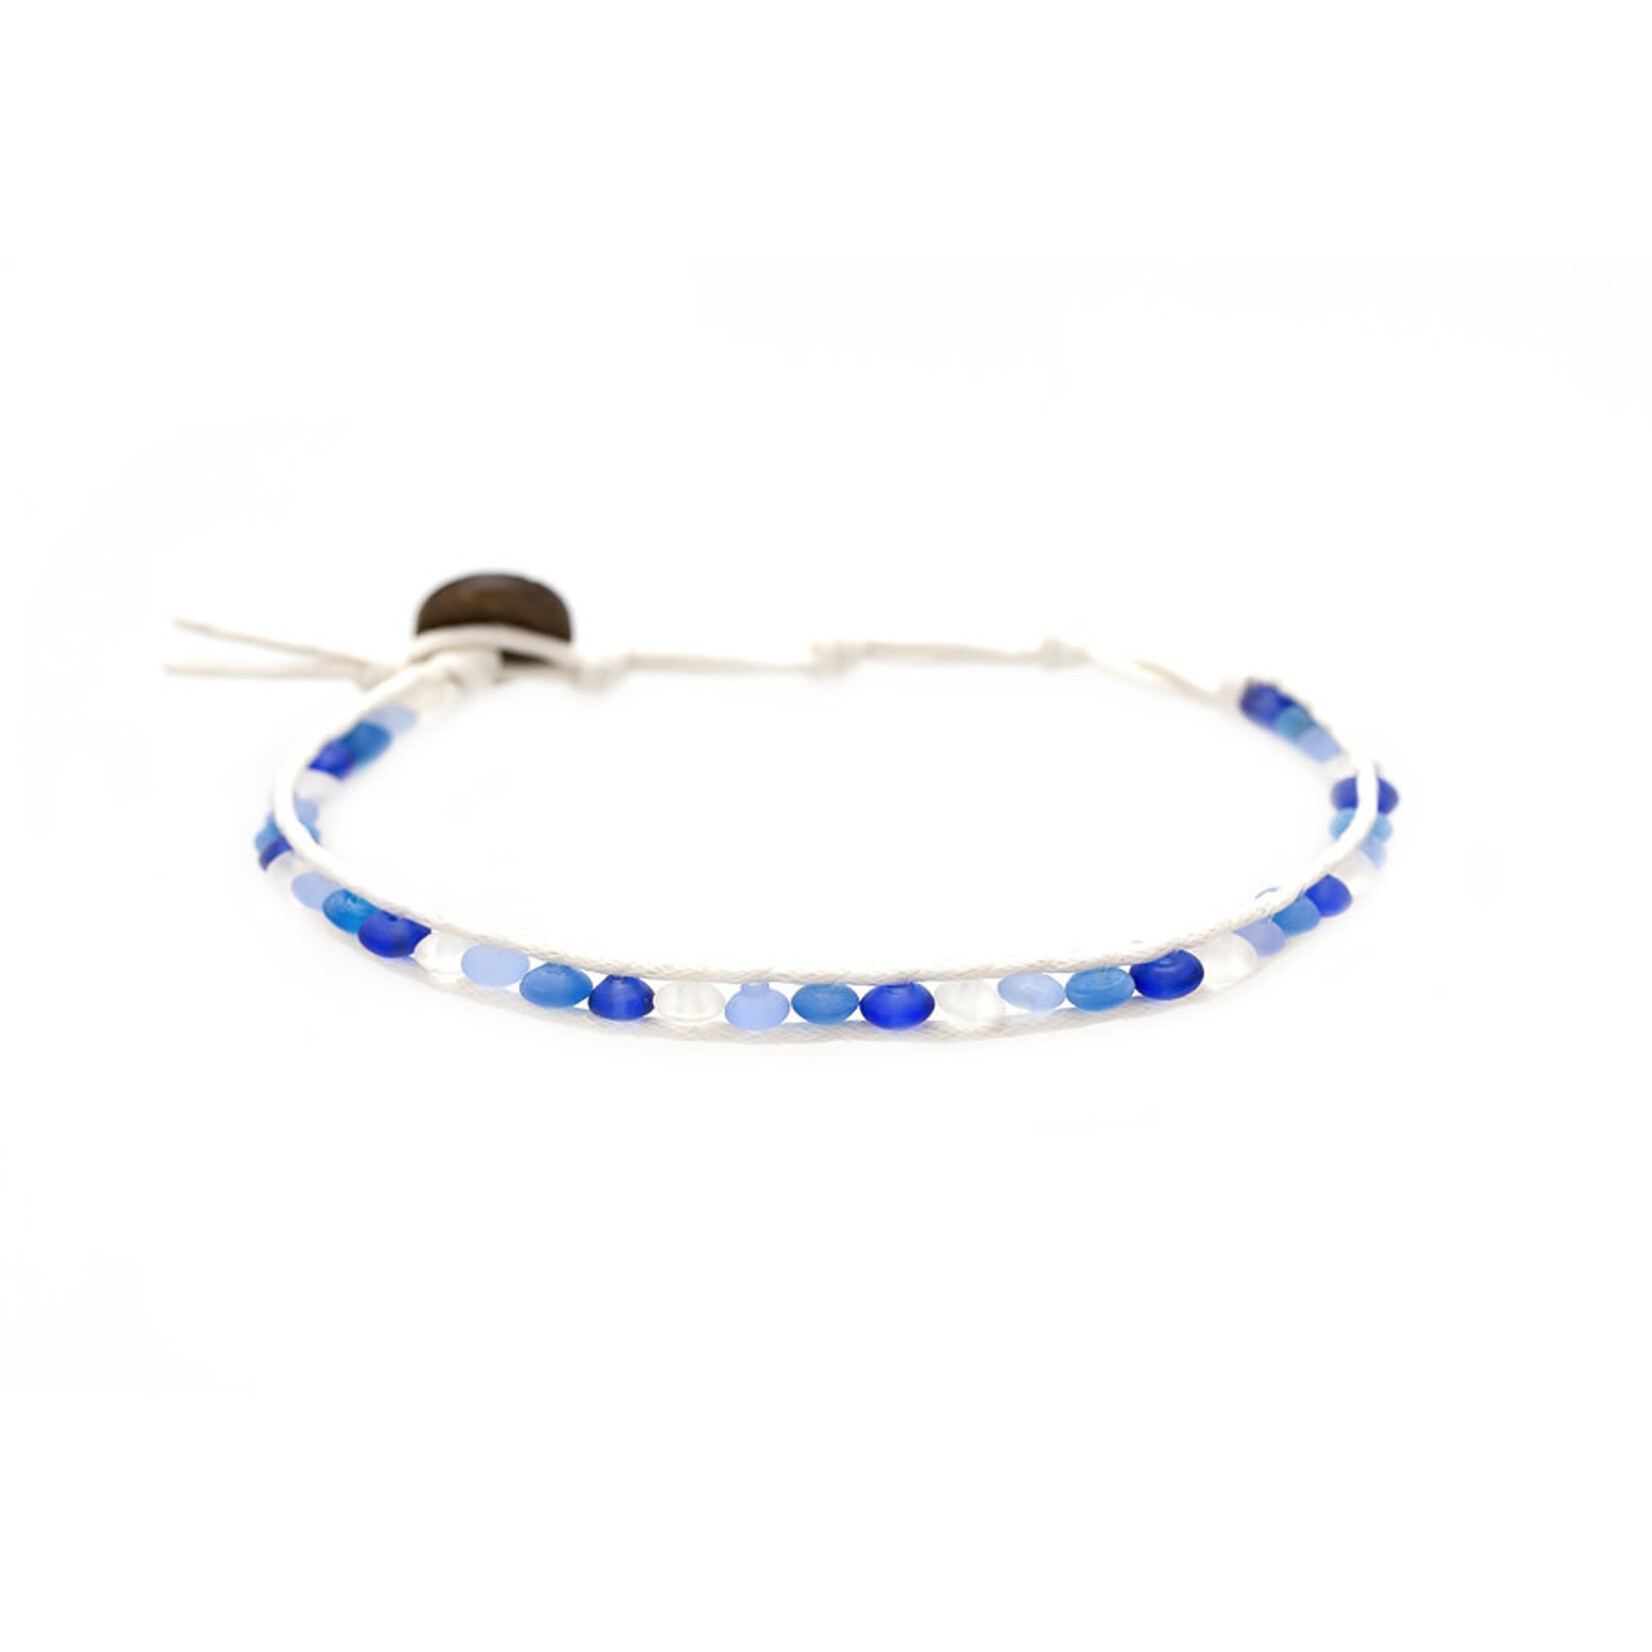 Lotus and Luna Sea Glass Anklets